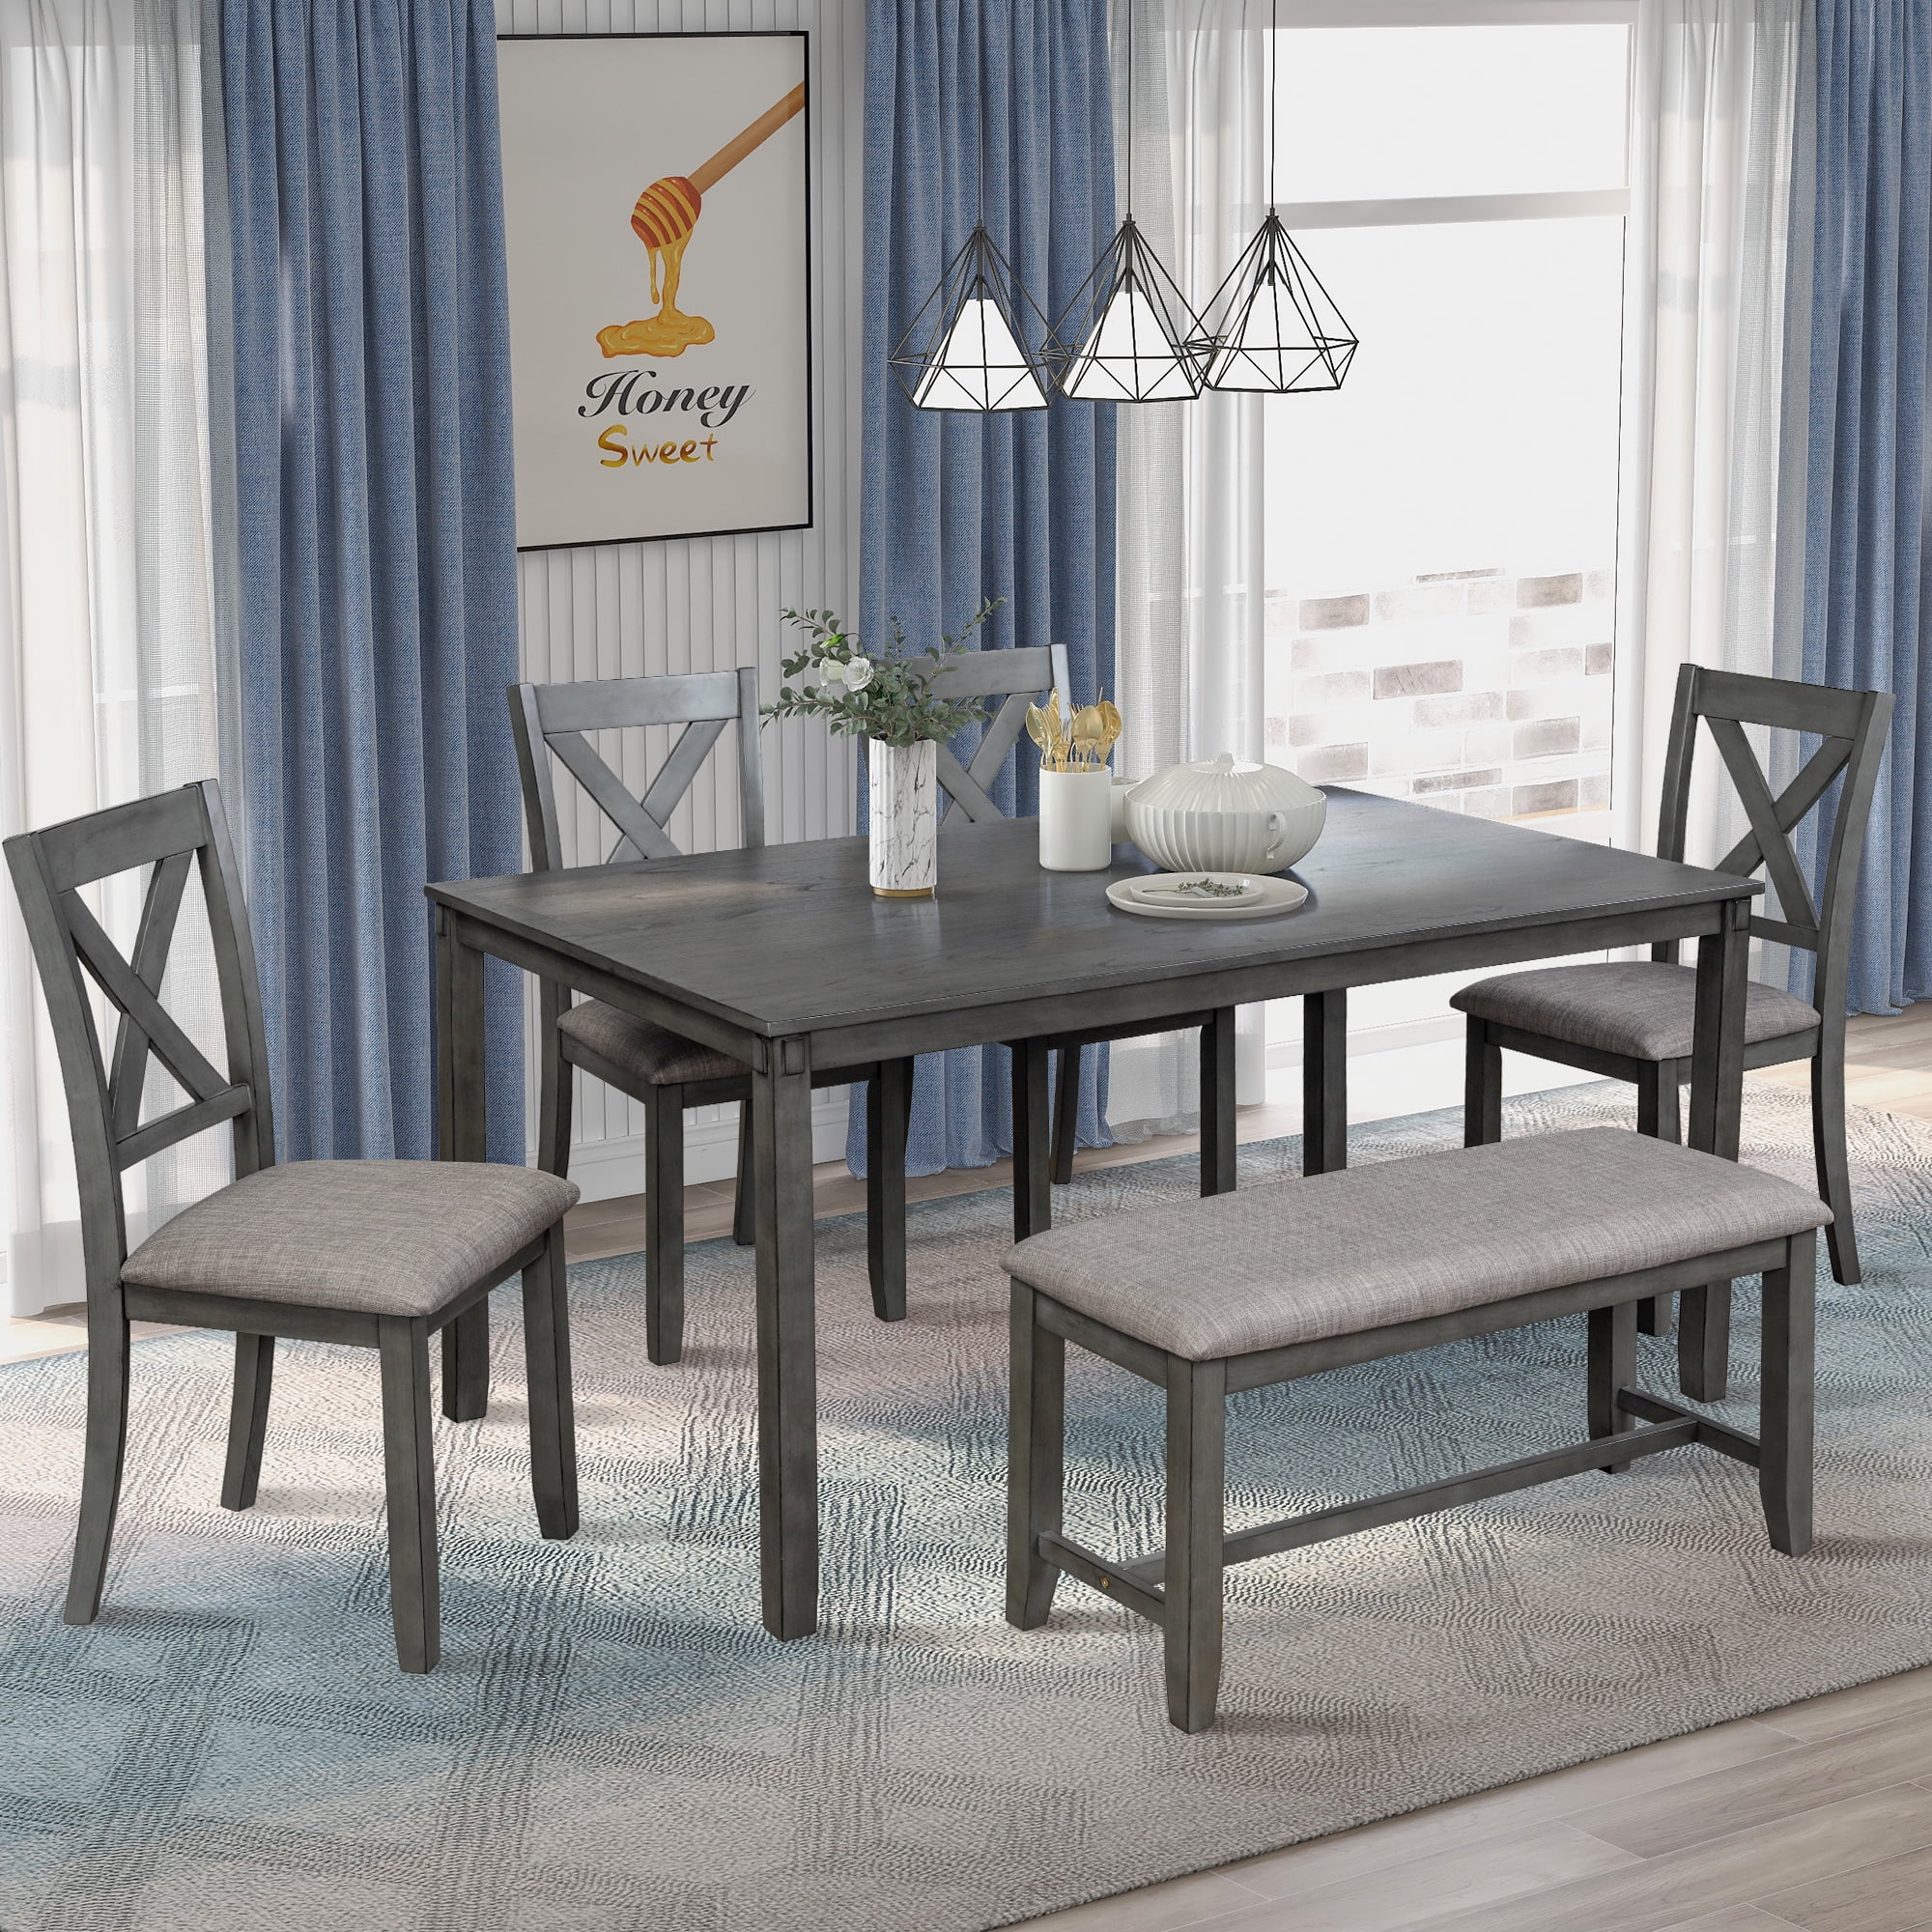 6 Piece Dining Table Set Modern Home, Dining Room Table Bench And Chairs Set